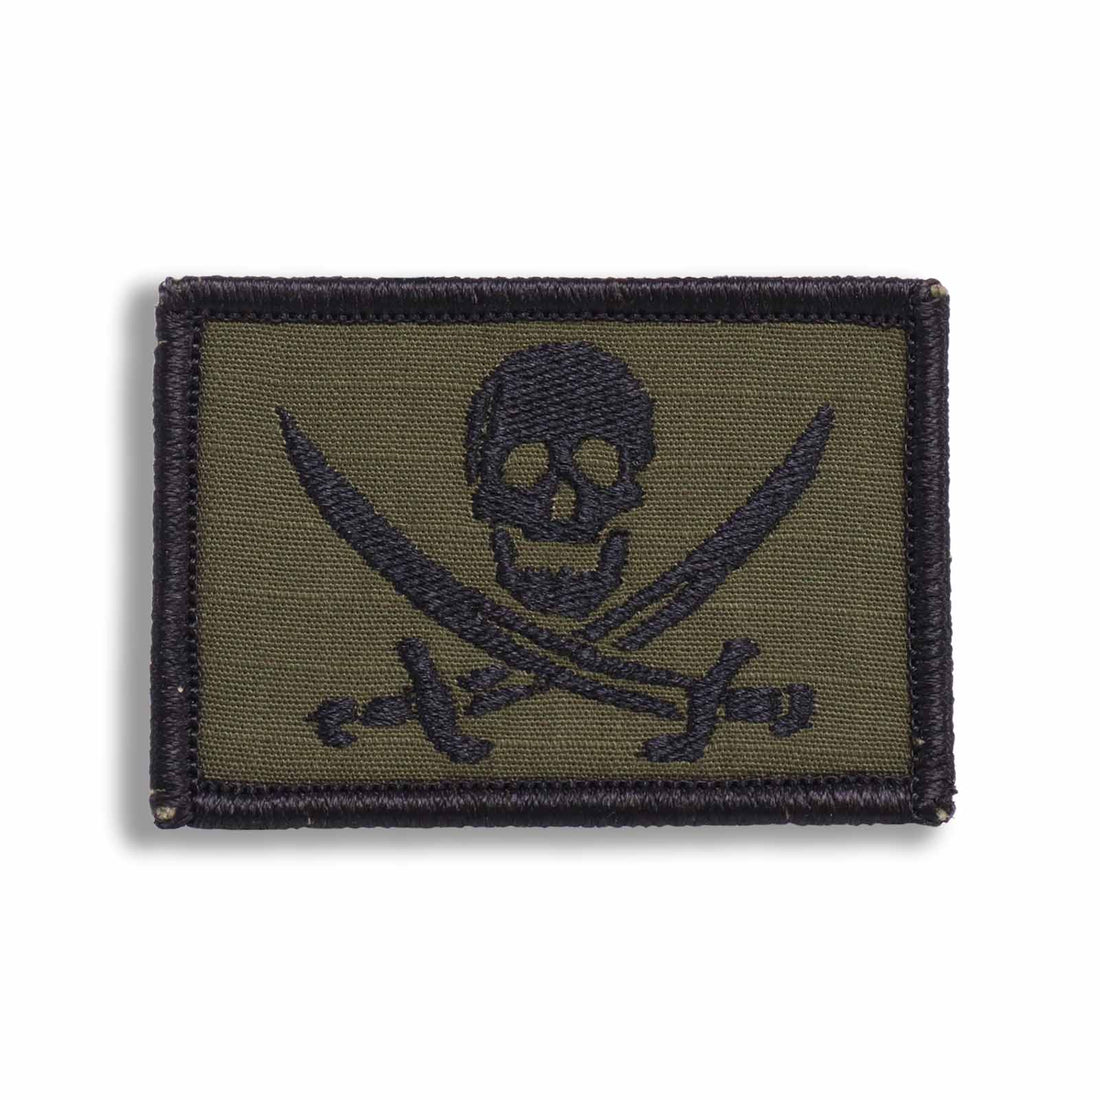 Supplies - Identification - Morale Patches - Offbase Pirate Jolly Roger Flag Patch